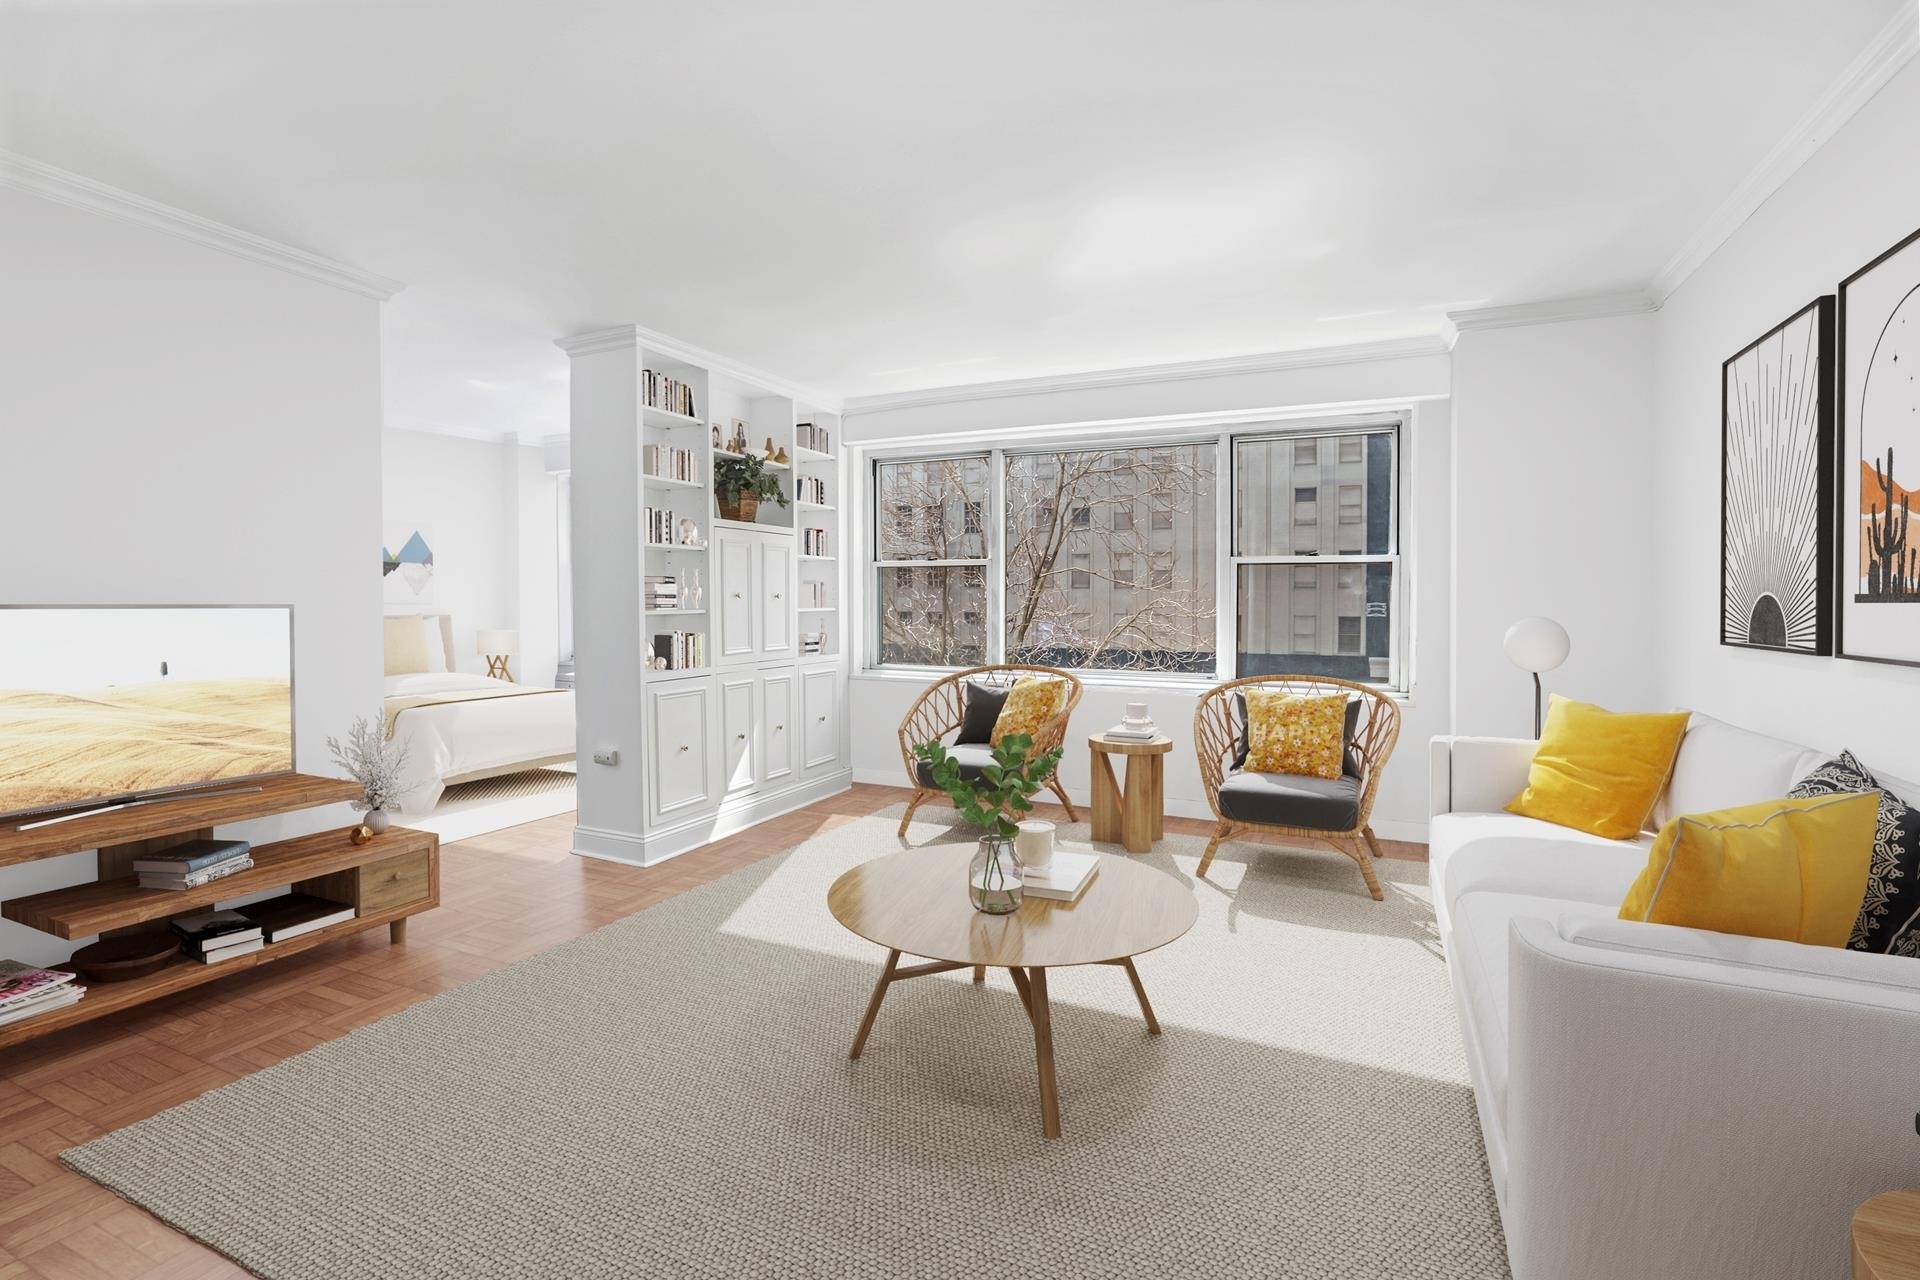 Co-op Properties for Sale at 150 E 61ST ST, 5A Lenox Hill, New York, New York 10065